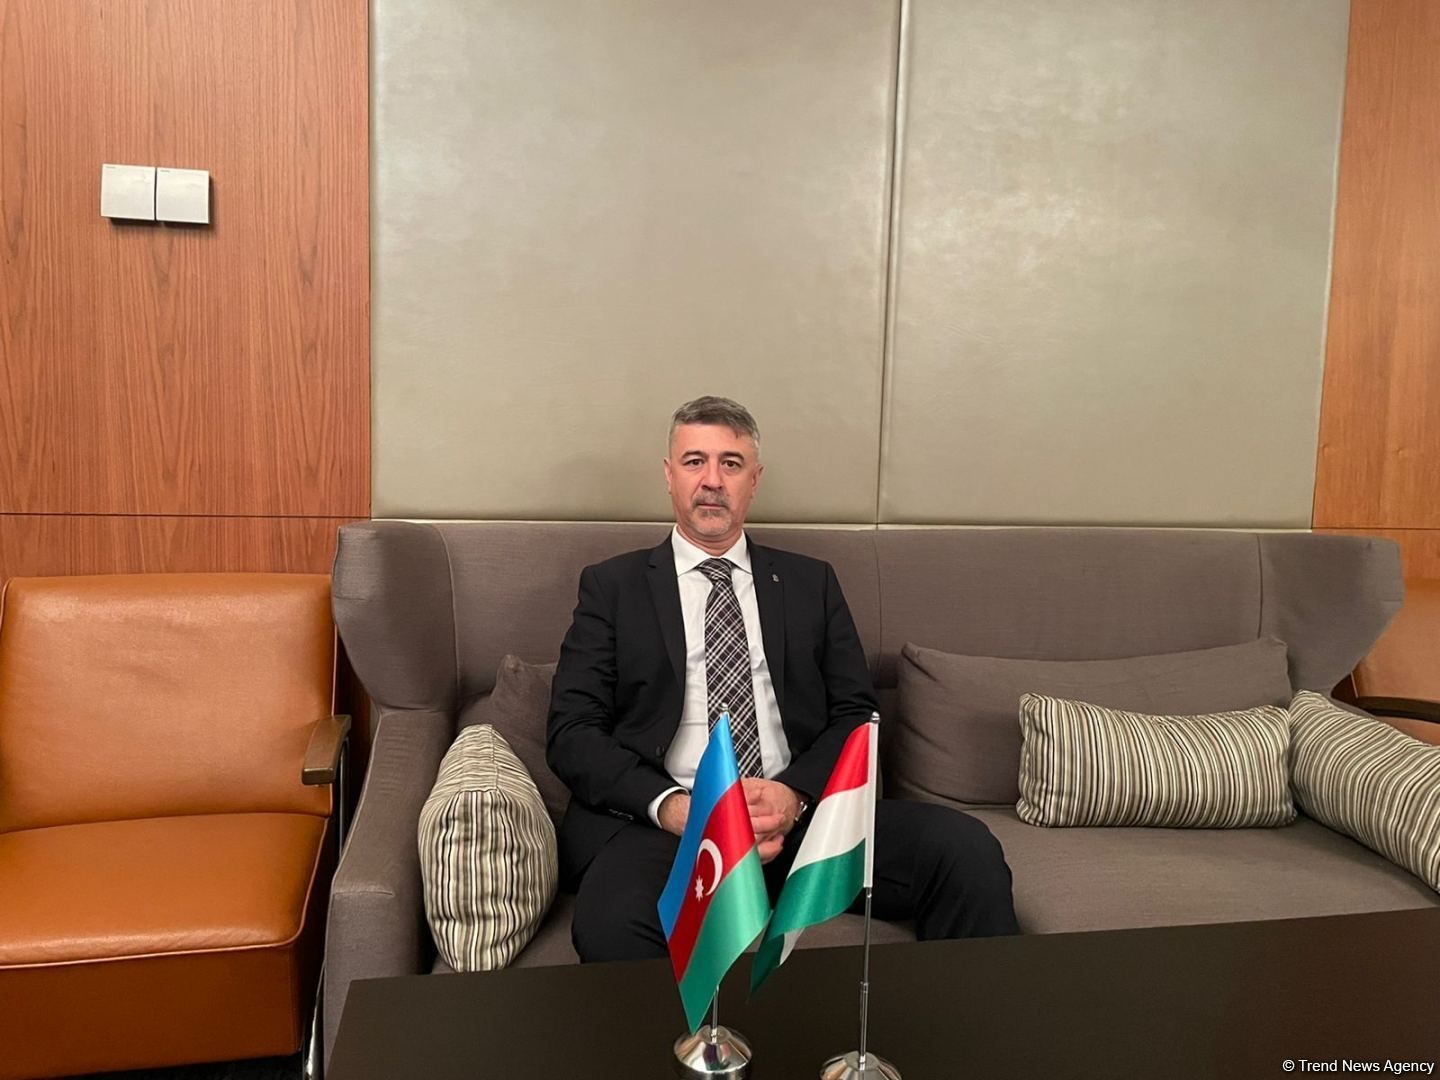 Hungary plans to cooperate with Azerbaijan in renewable energy sector